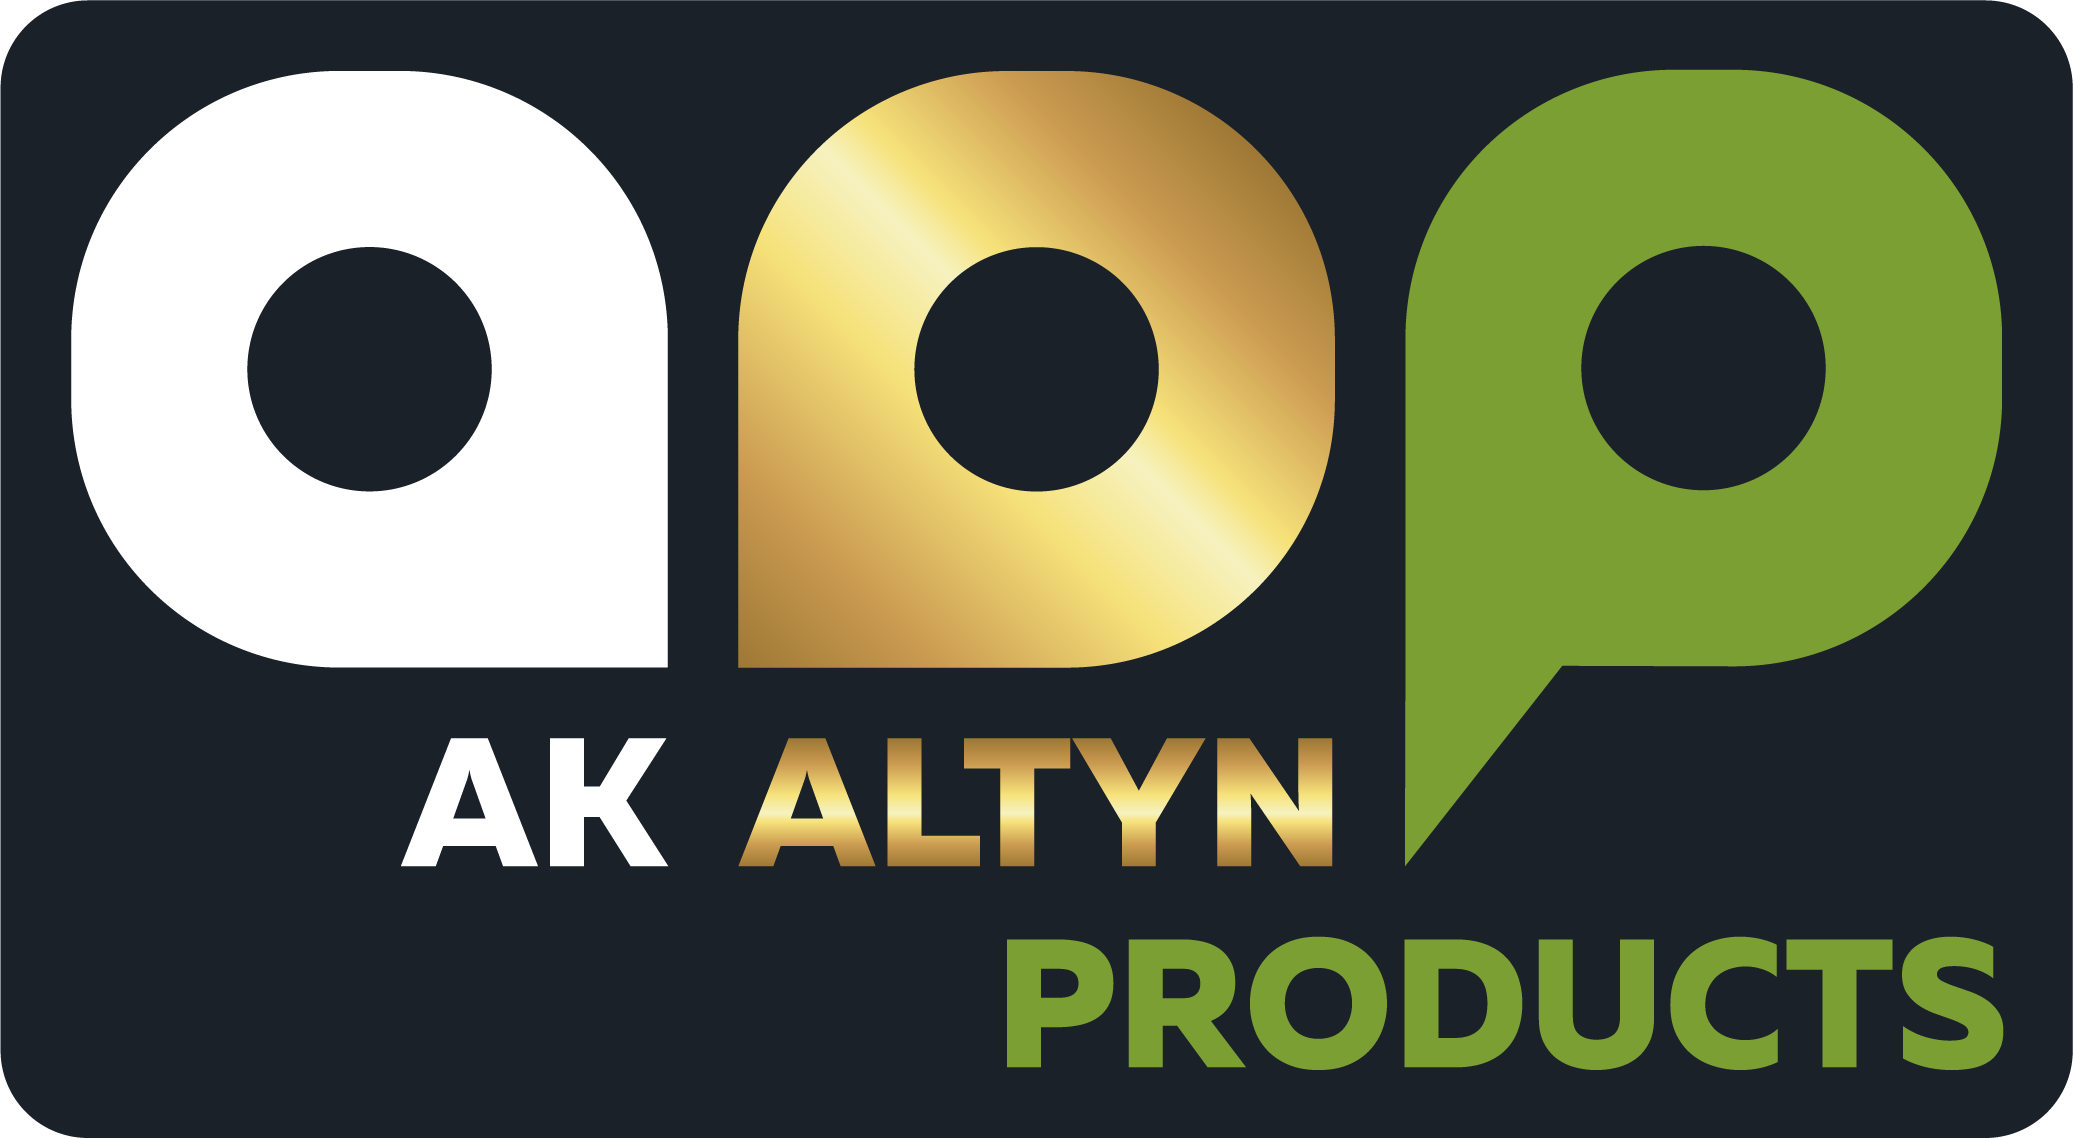 AkAltynProducts